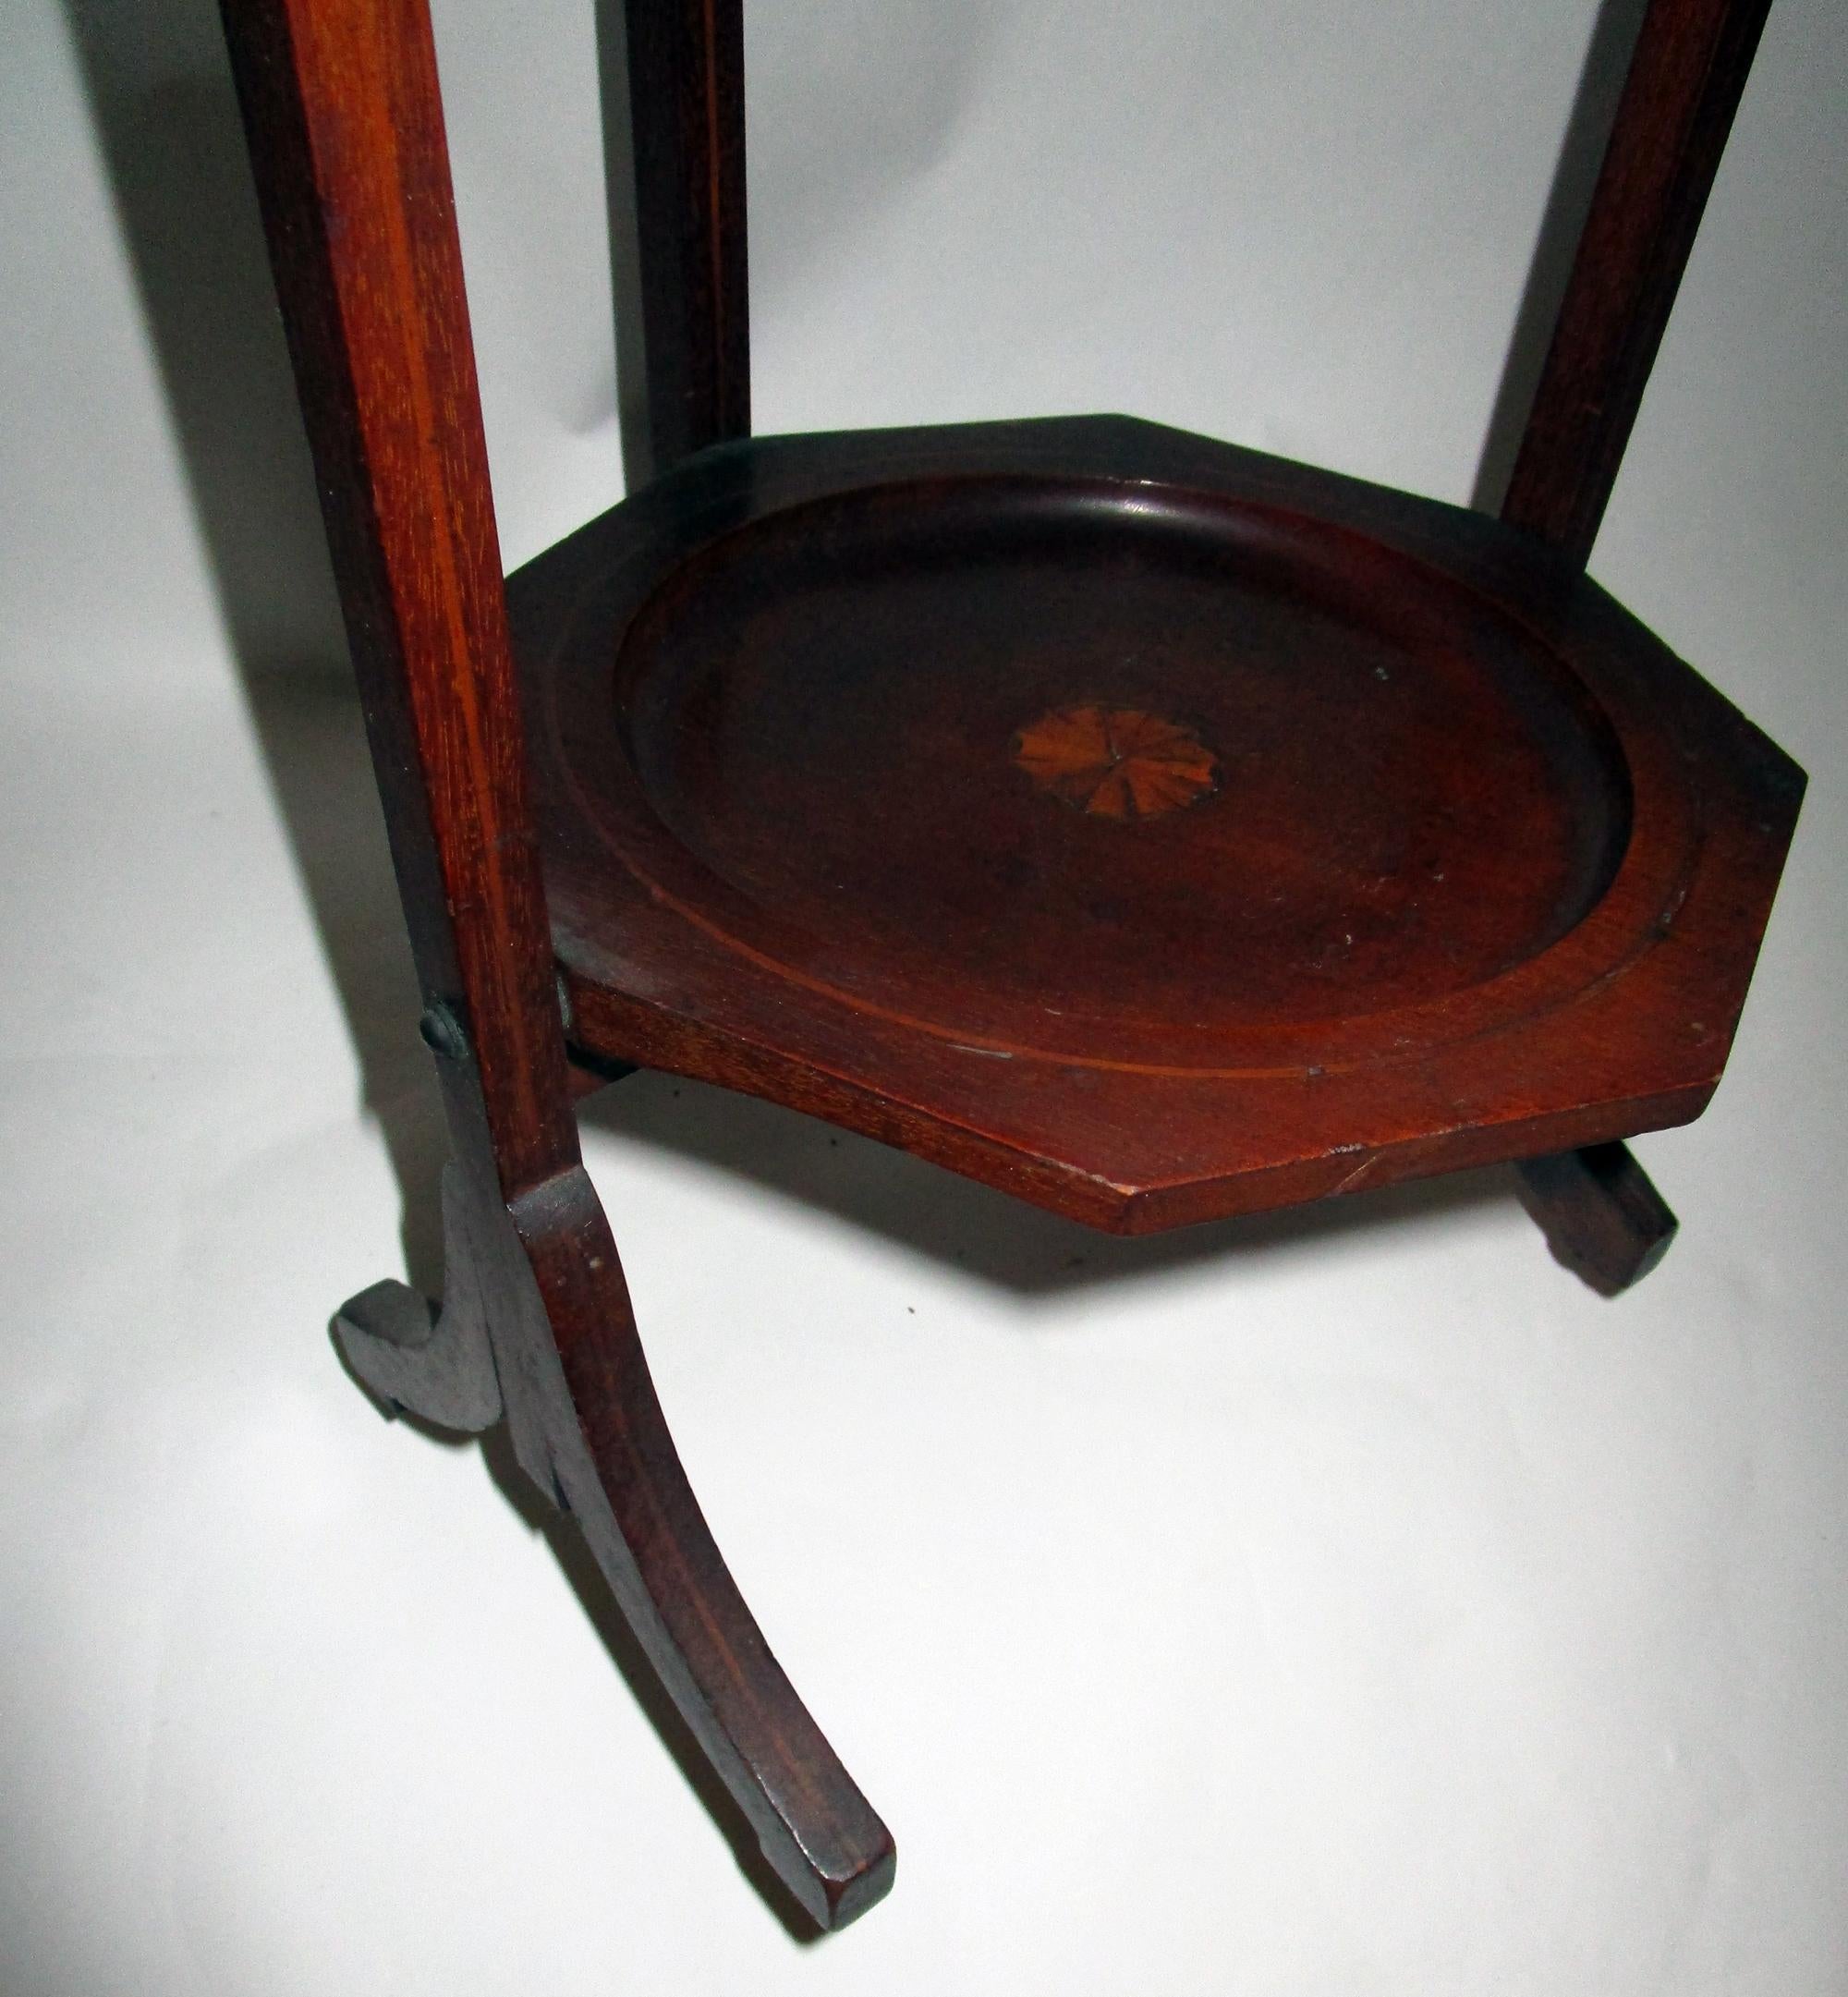 Late 19th Century 19th century Regency Mahogany Side Table or Muffin Stand